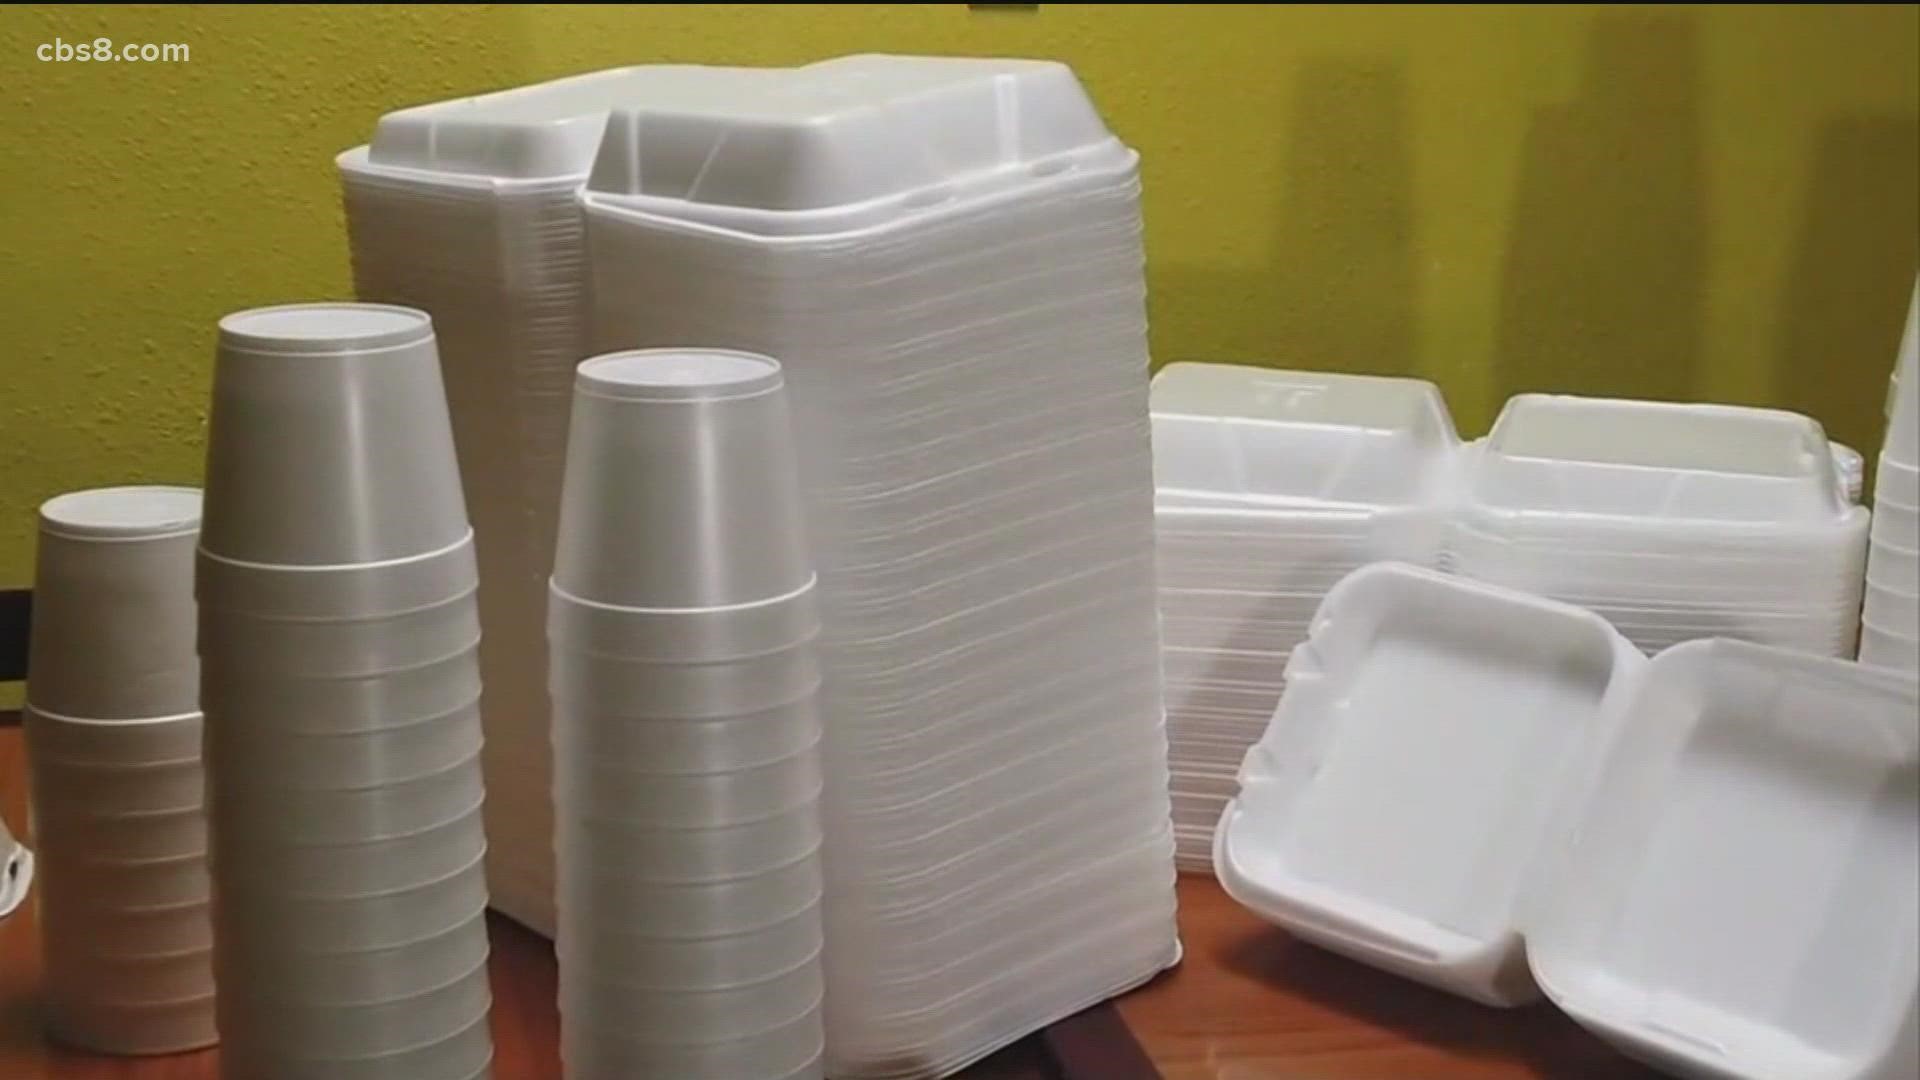 San Diego tried to ban polystyrene back in 2019 but then that plan was put on hold. Now the idea is back and this time, it looks like the ban will happen.